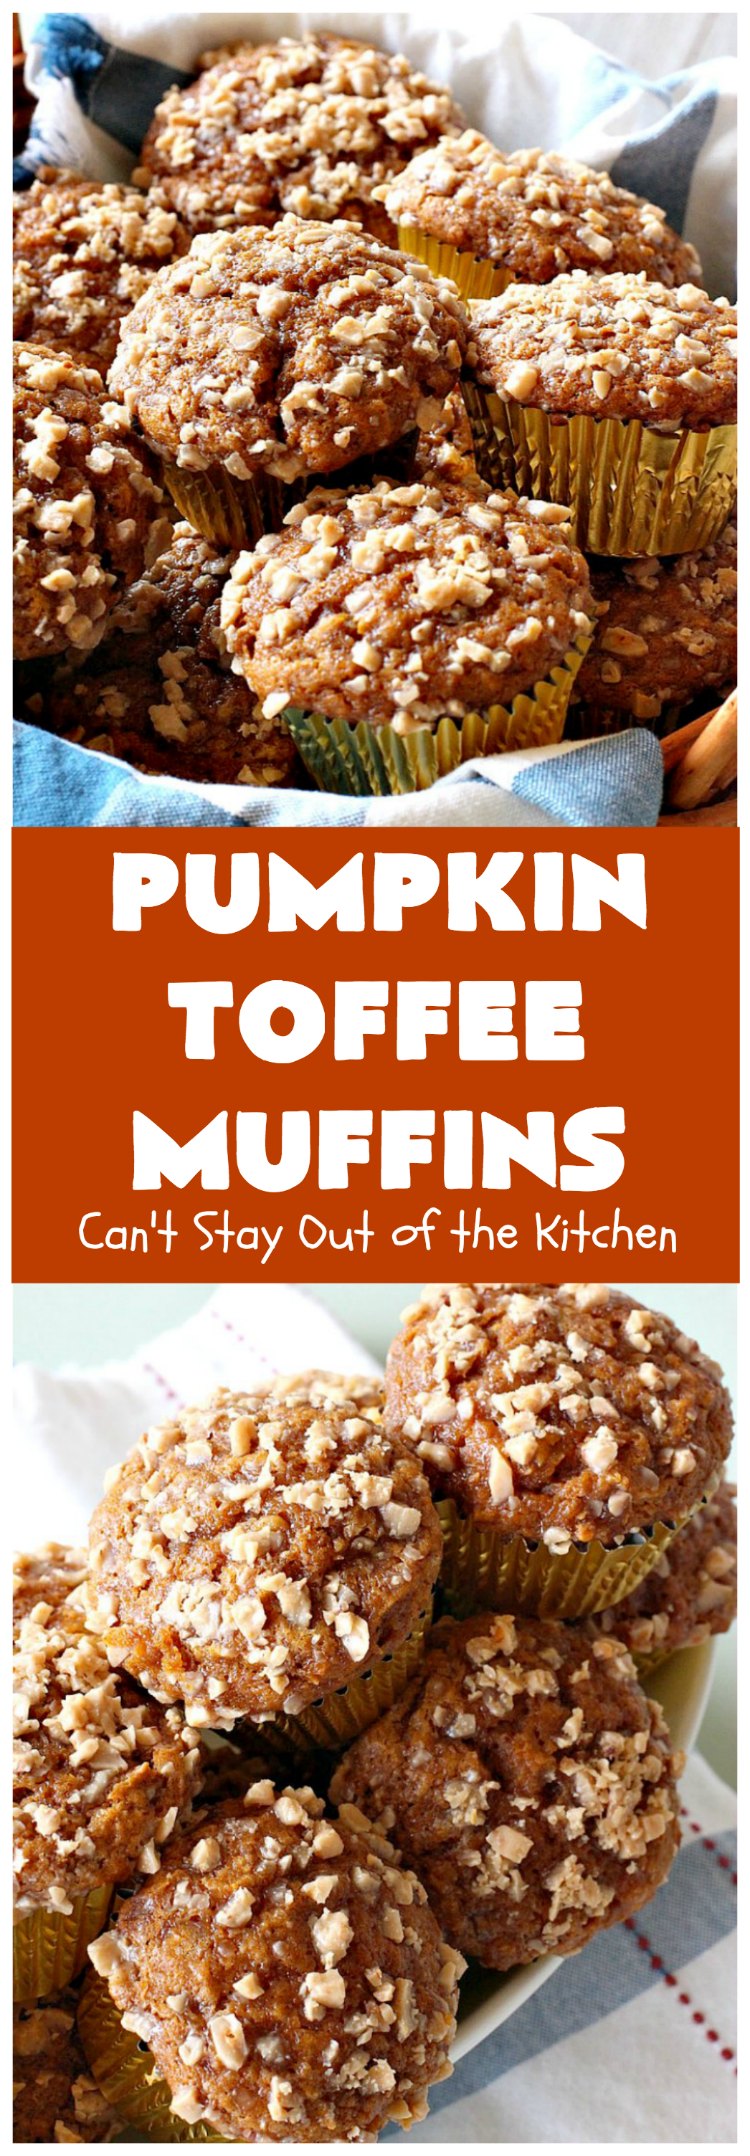 Pumpkin Toffee Muffins | Can't Stay Out of the Kitchen